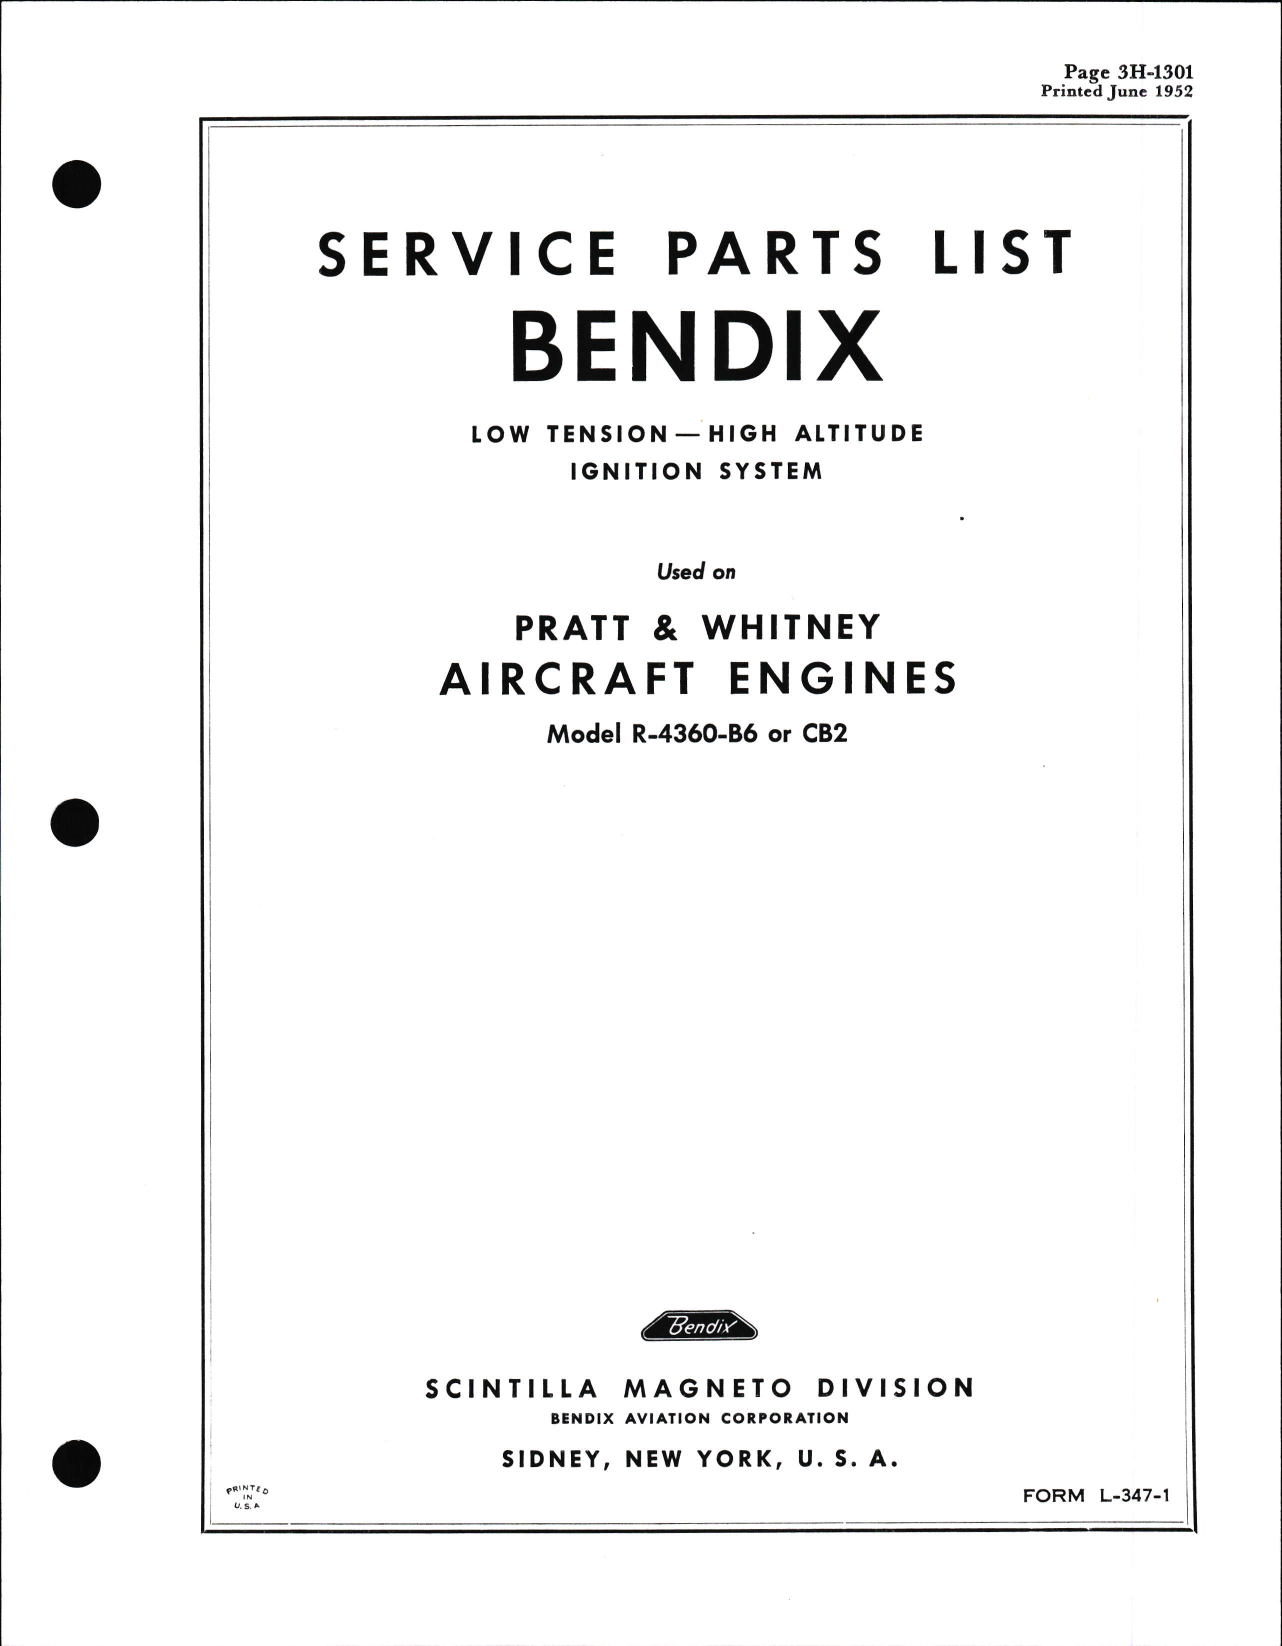 Sample page 1 from AirCorps Library document: Service Parts List for Bendix Low Tension - High Altitude Ignition for Pratt & Whitney R-4360-B6 or CB2